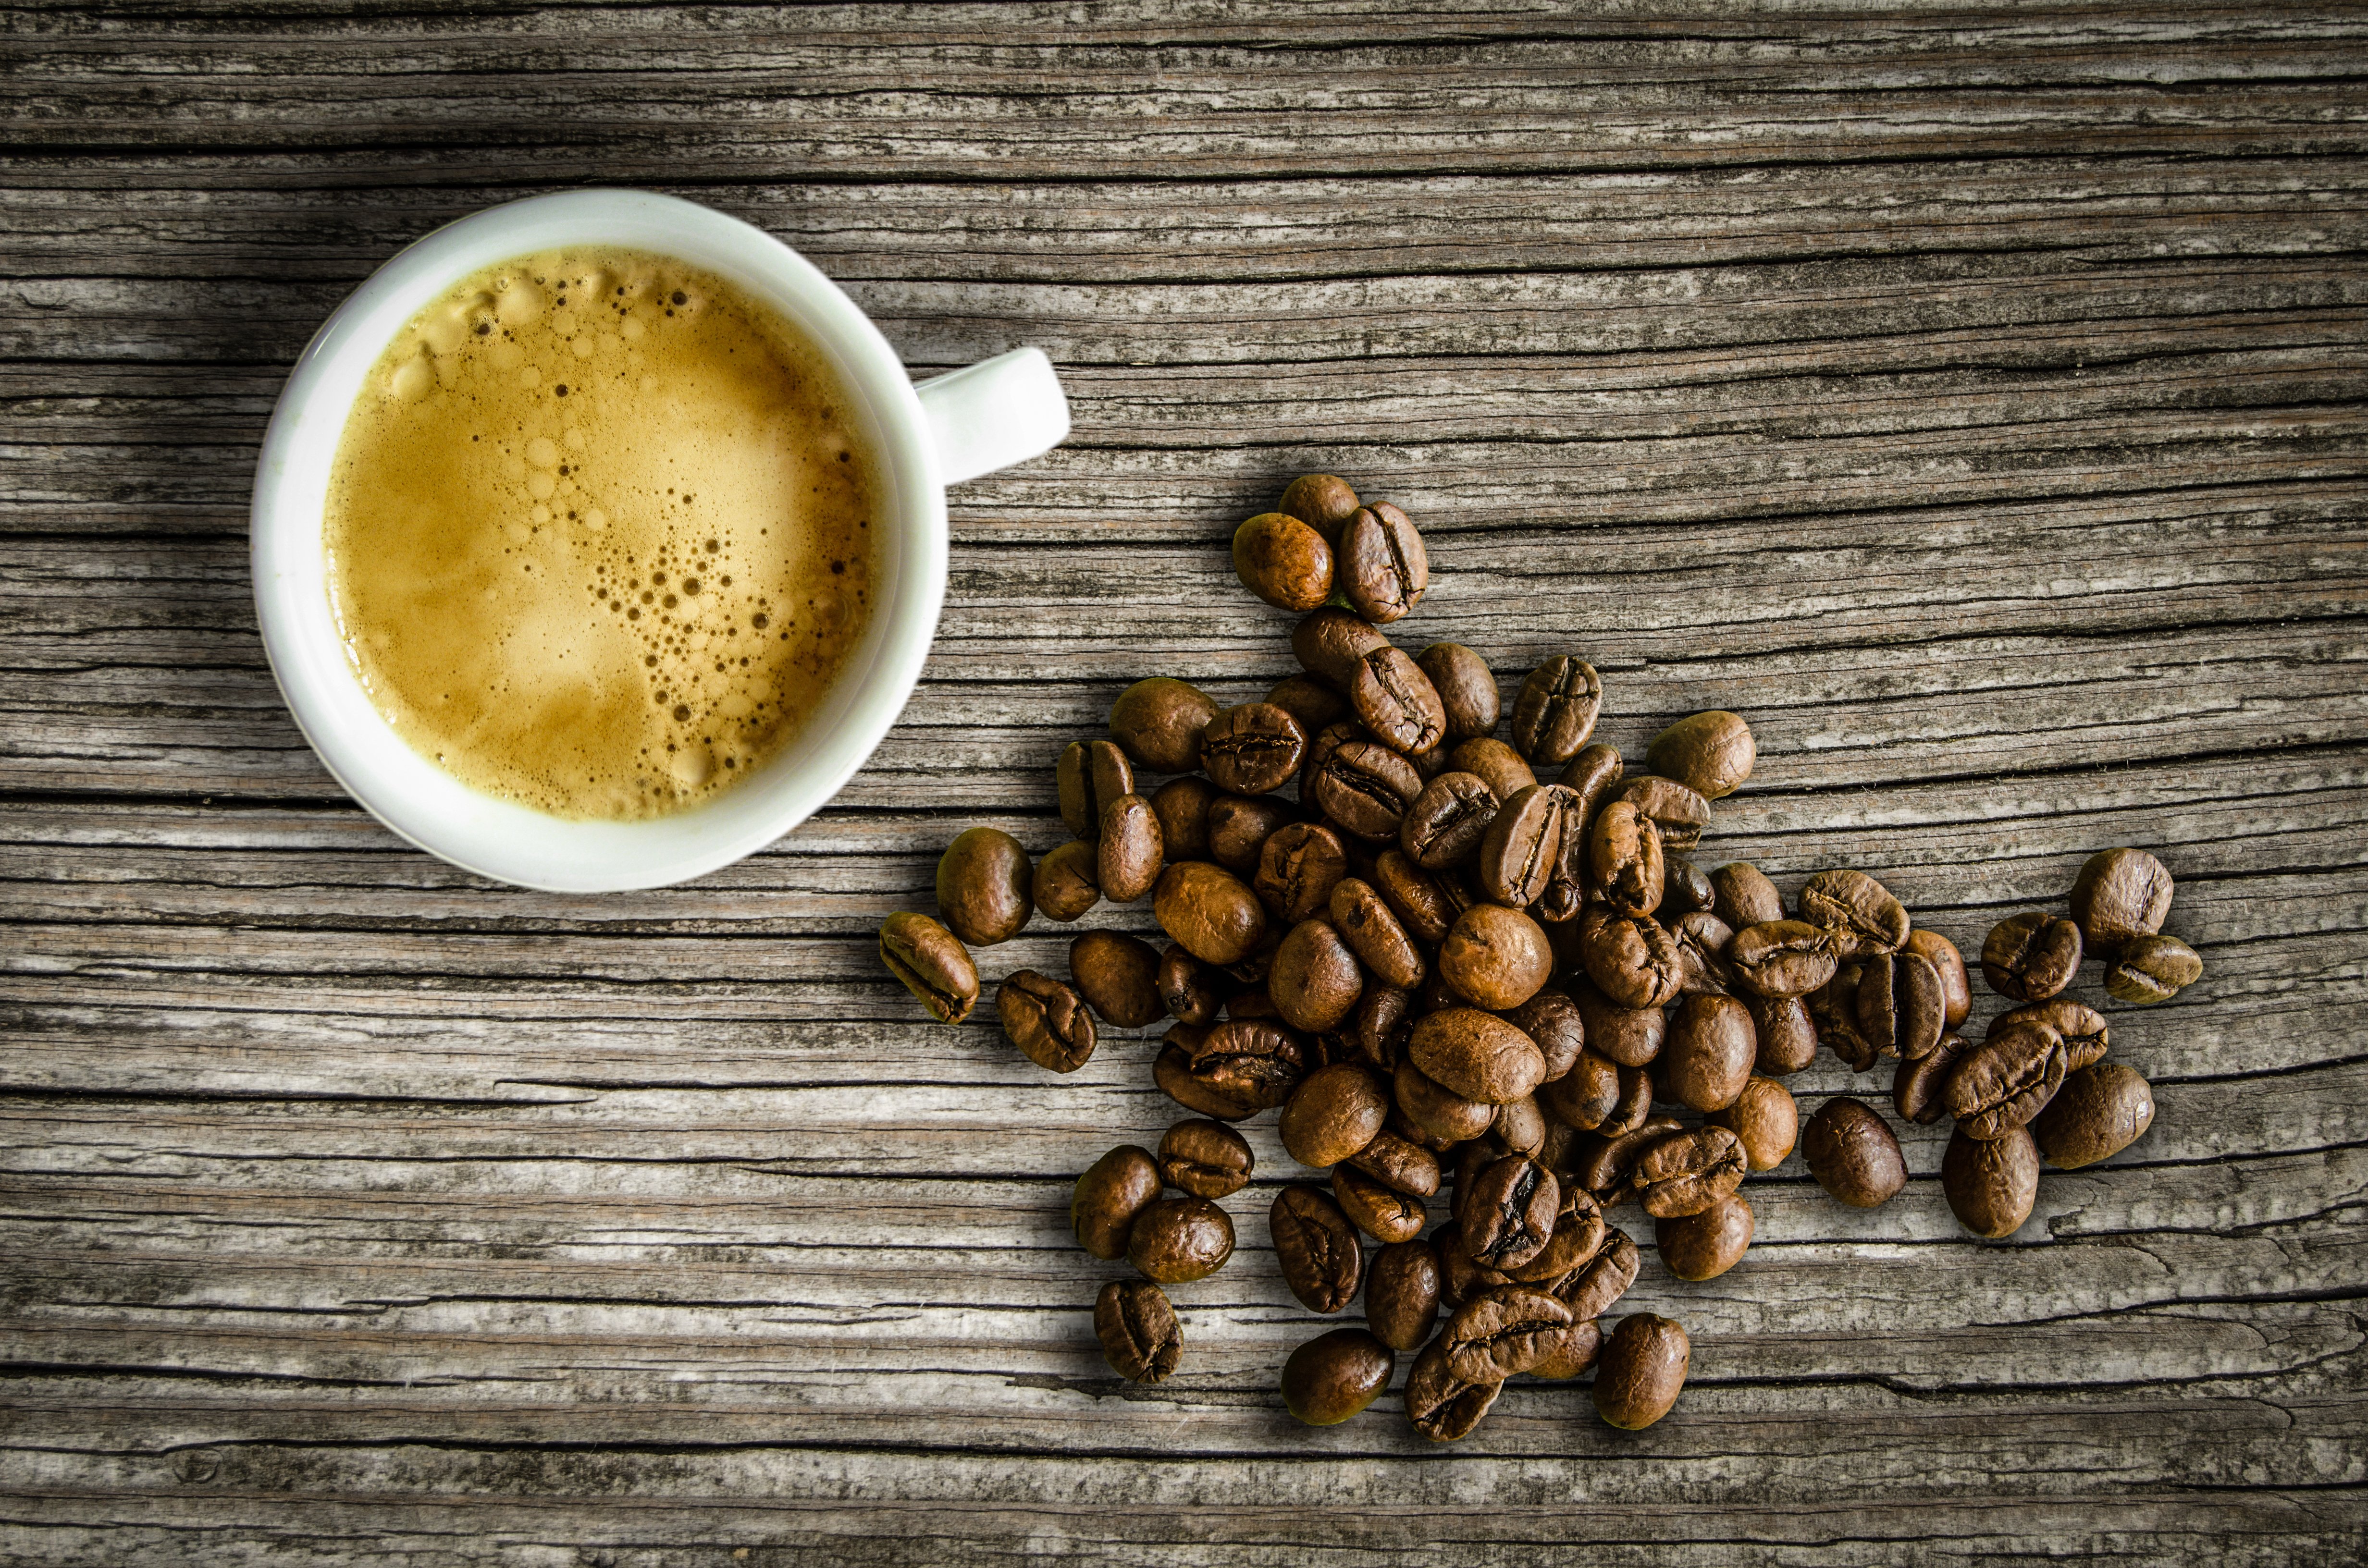 Espresso and coffee beans on a wooden background, representing coffee, tea, and chocolate brands that fight human trafficking